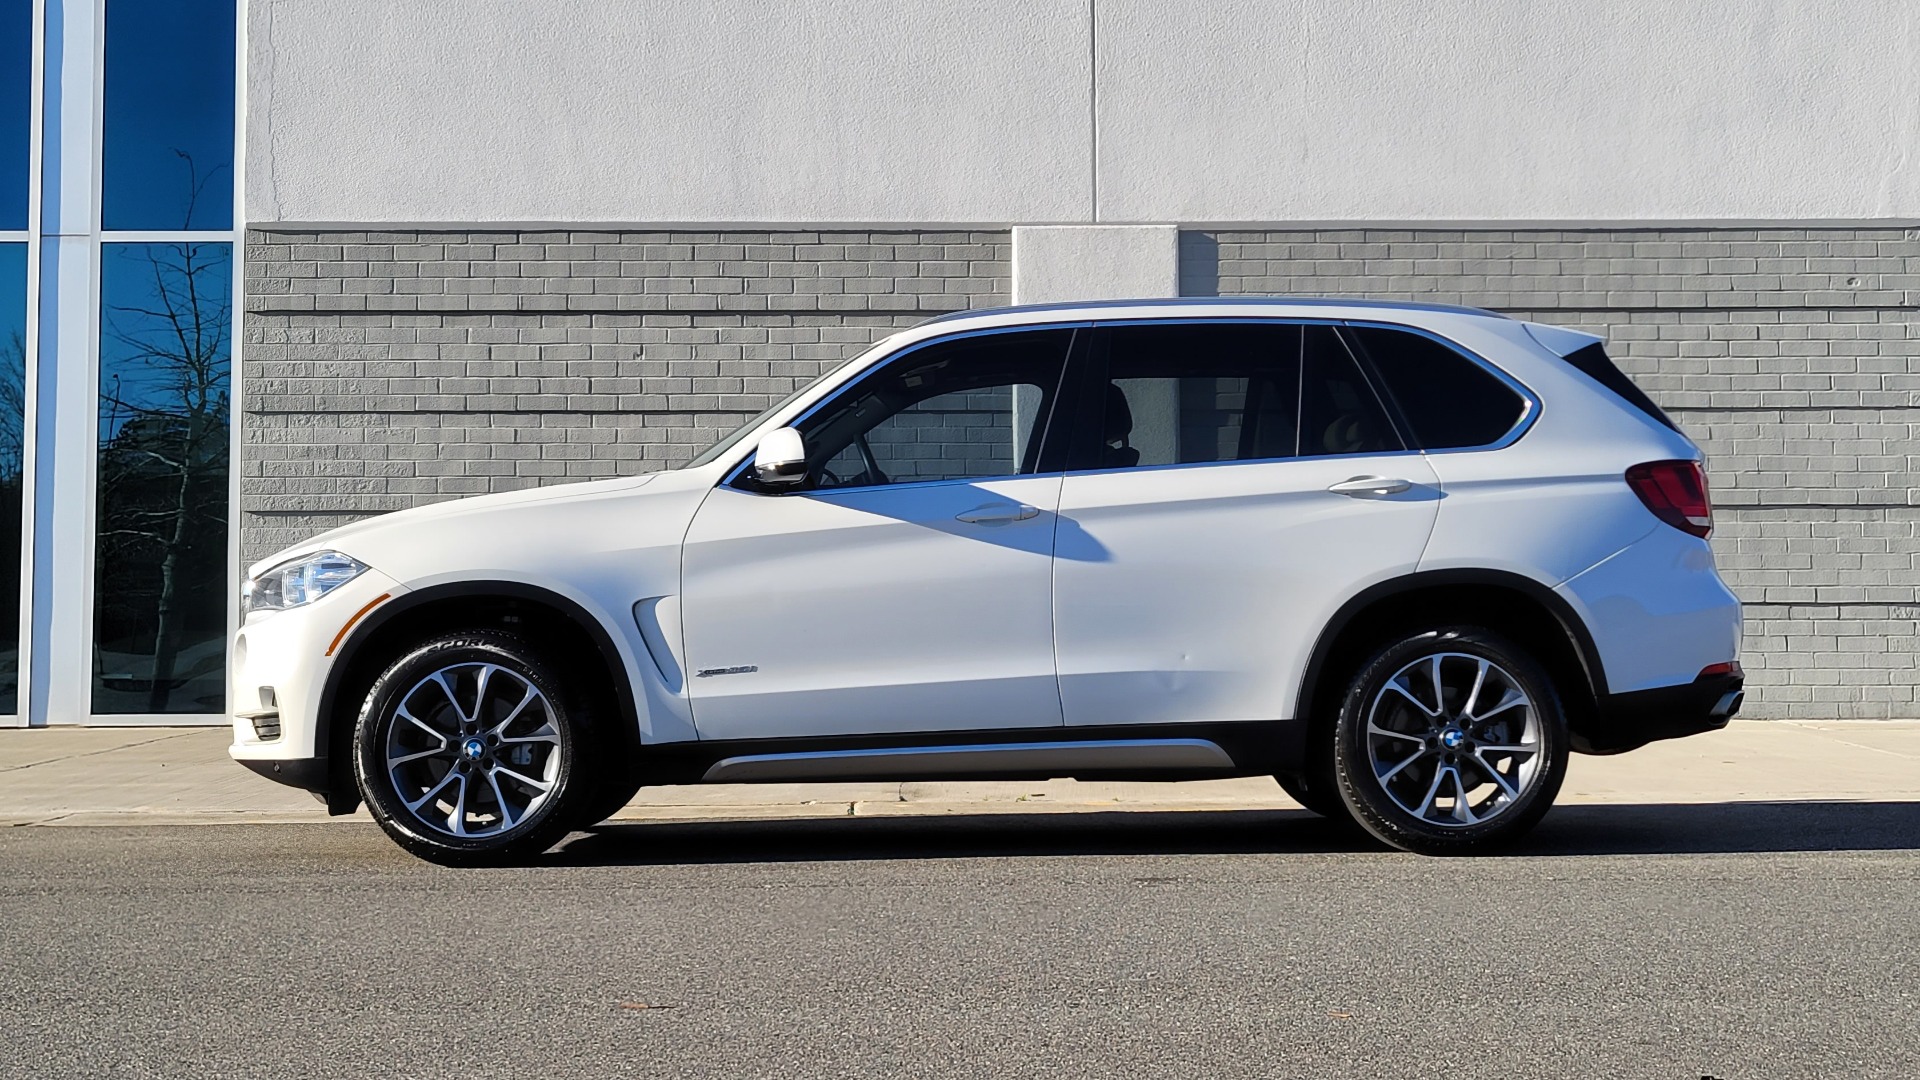 Used 2018 BMW X5 XDRIVE35I PREMIUM / DRVR ASST / HUD / WIRELESS CHARGING / HEATED SEATS for sale Sold at Formula Imports in Charlotte NC 28227 4